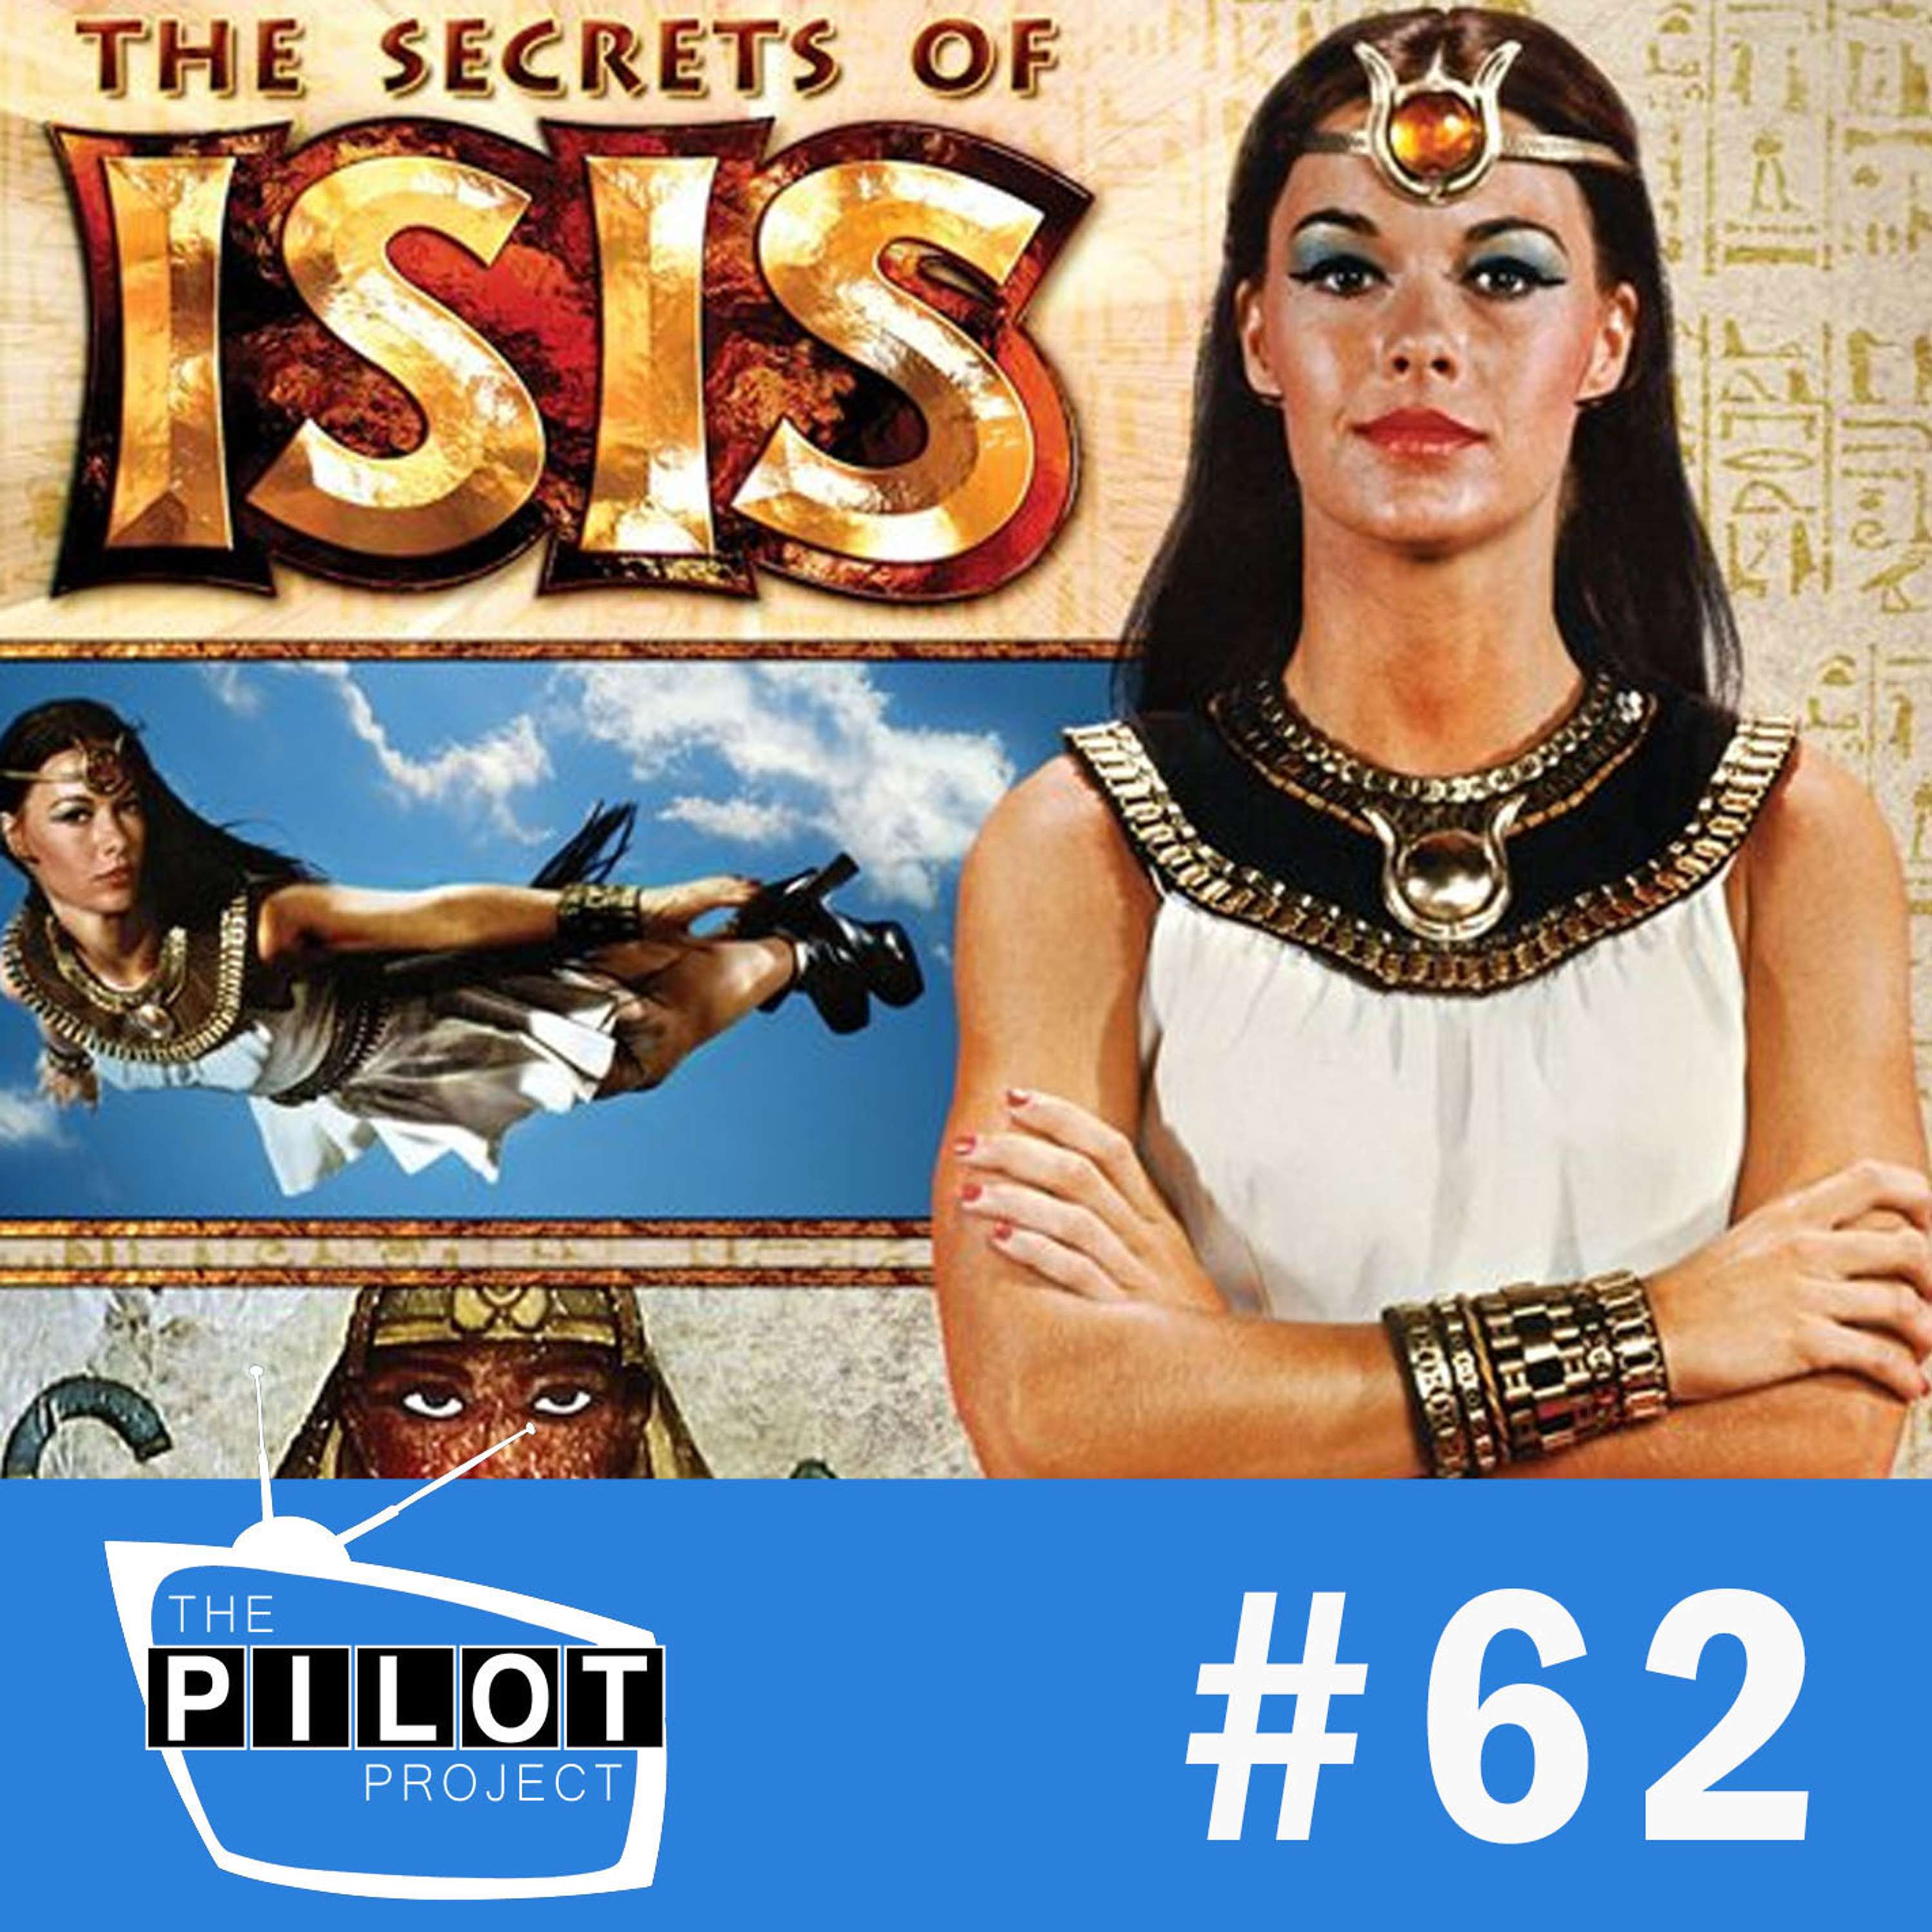 The Secrets of Isis (1975) - 